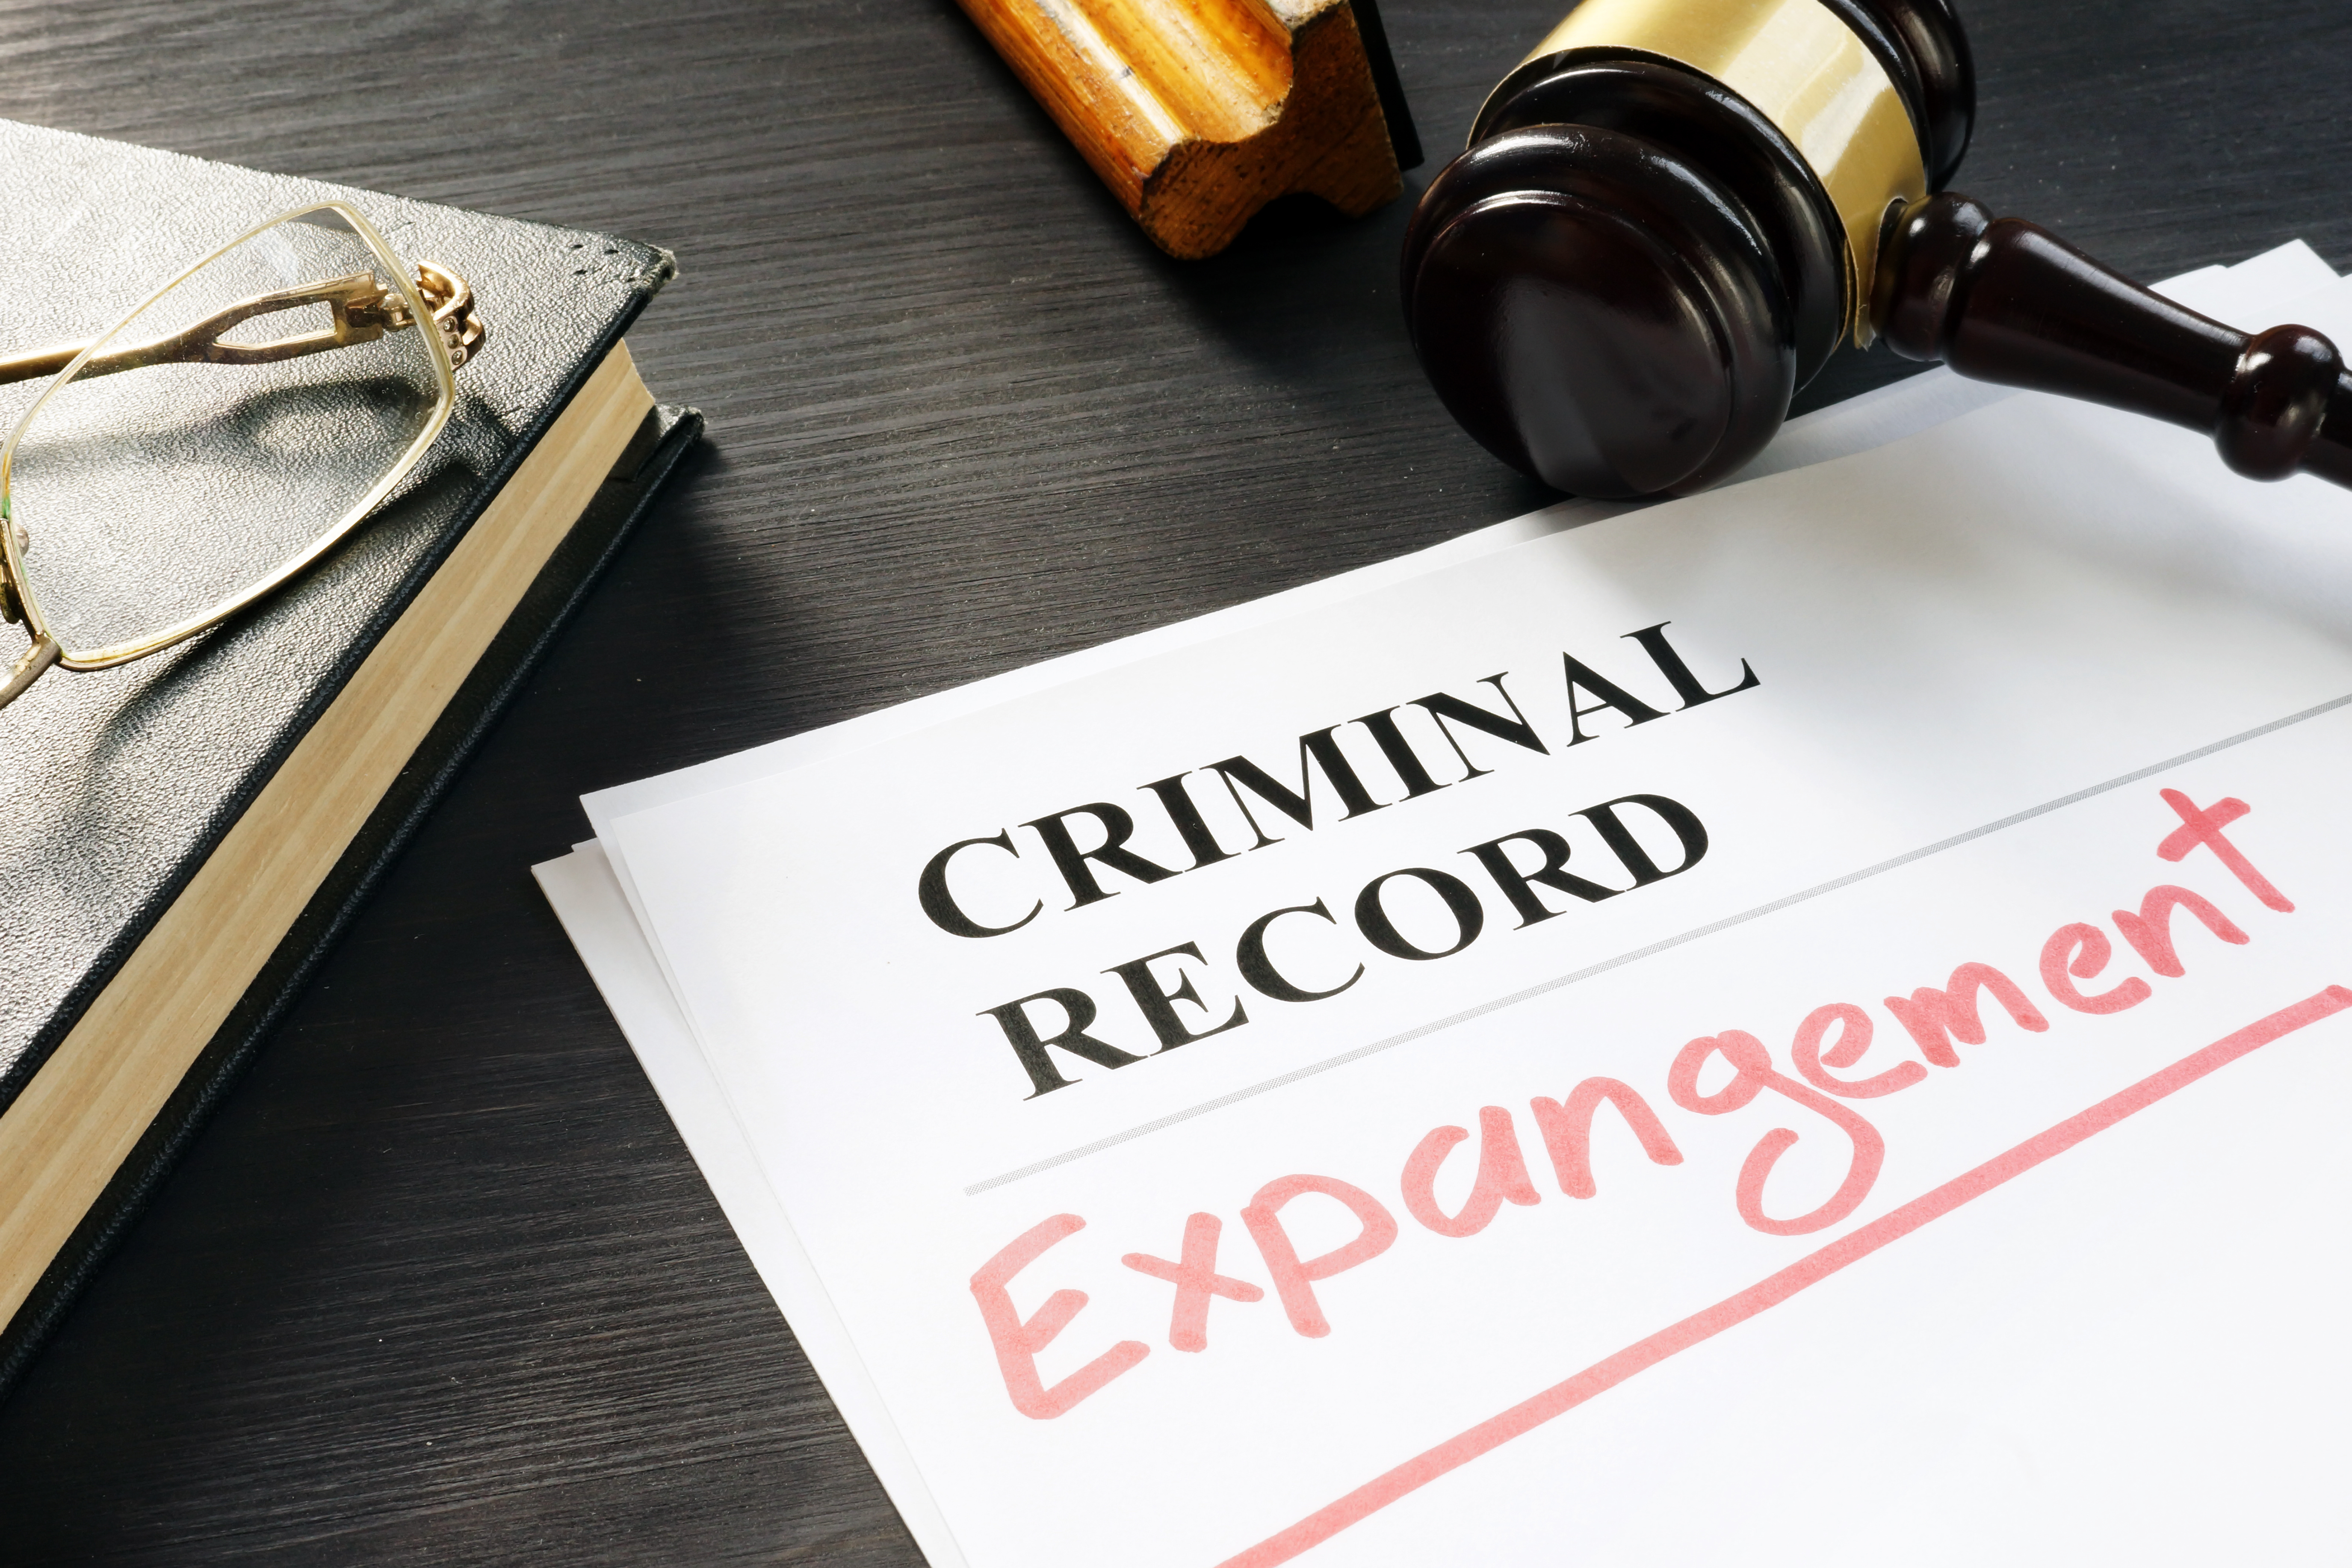 ed guyer law - record sealing or expungement